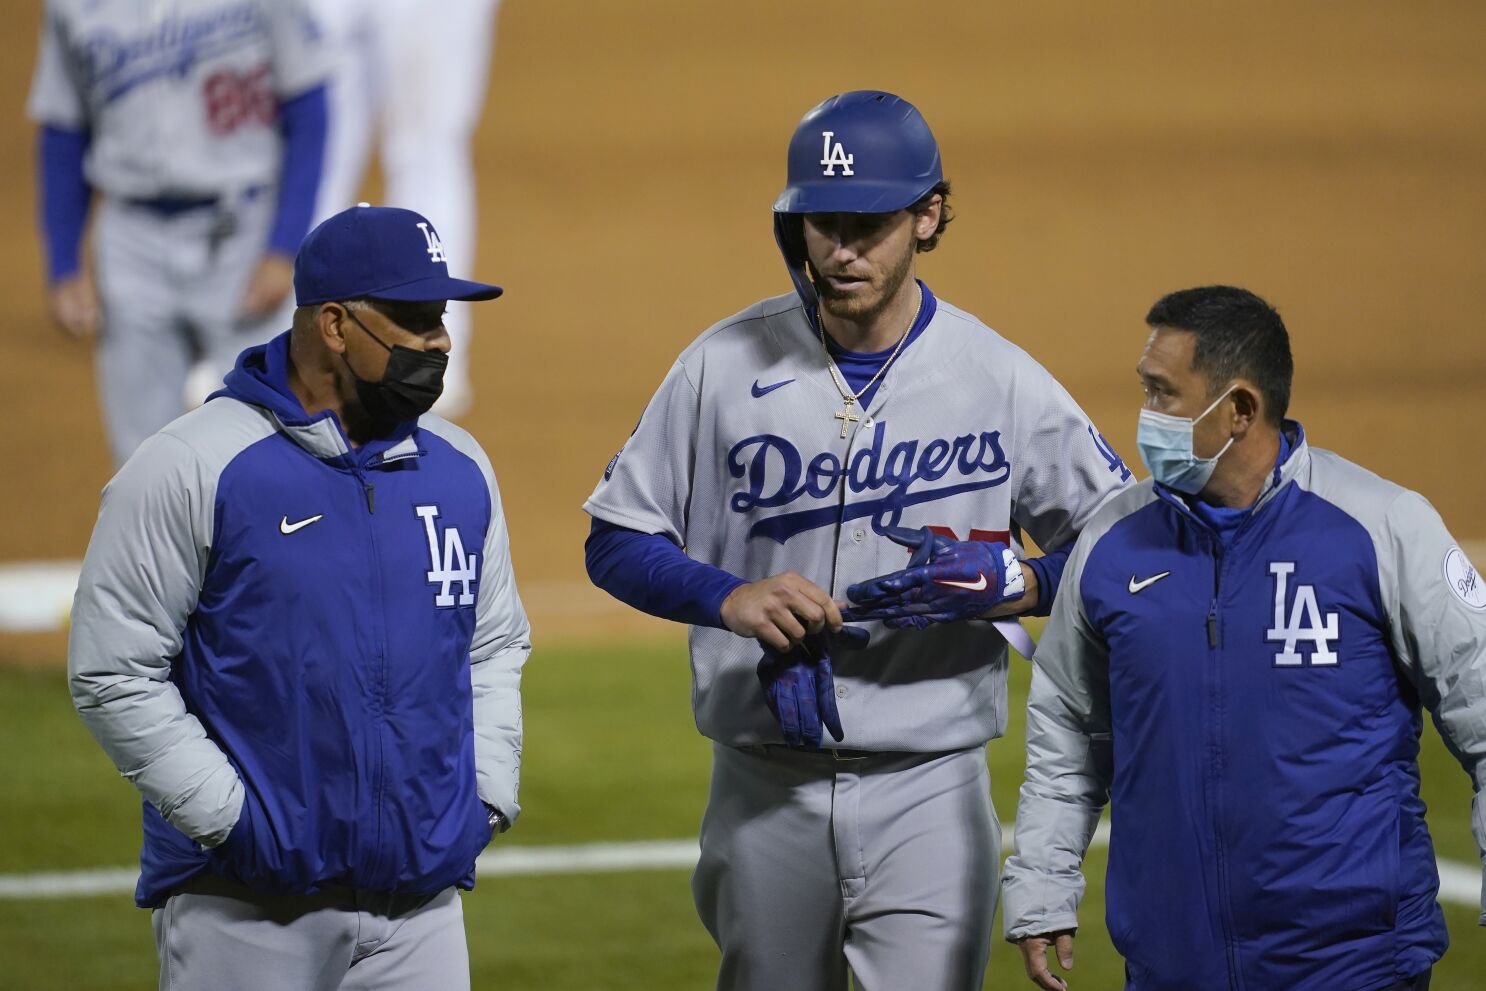 Cody Bellinger called up to make major league debut with Dodgers